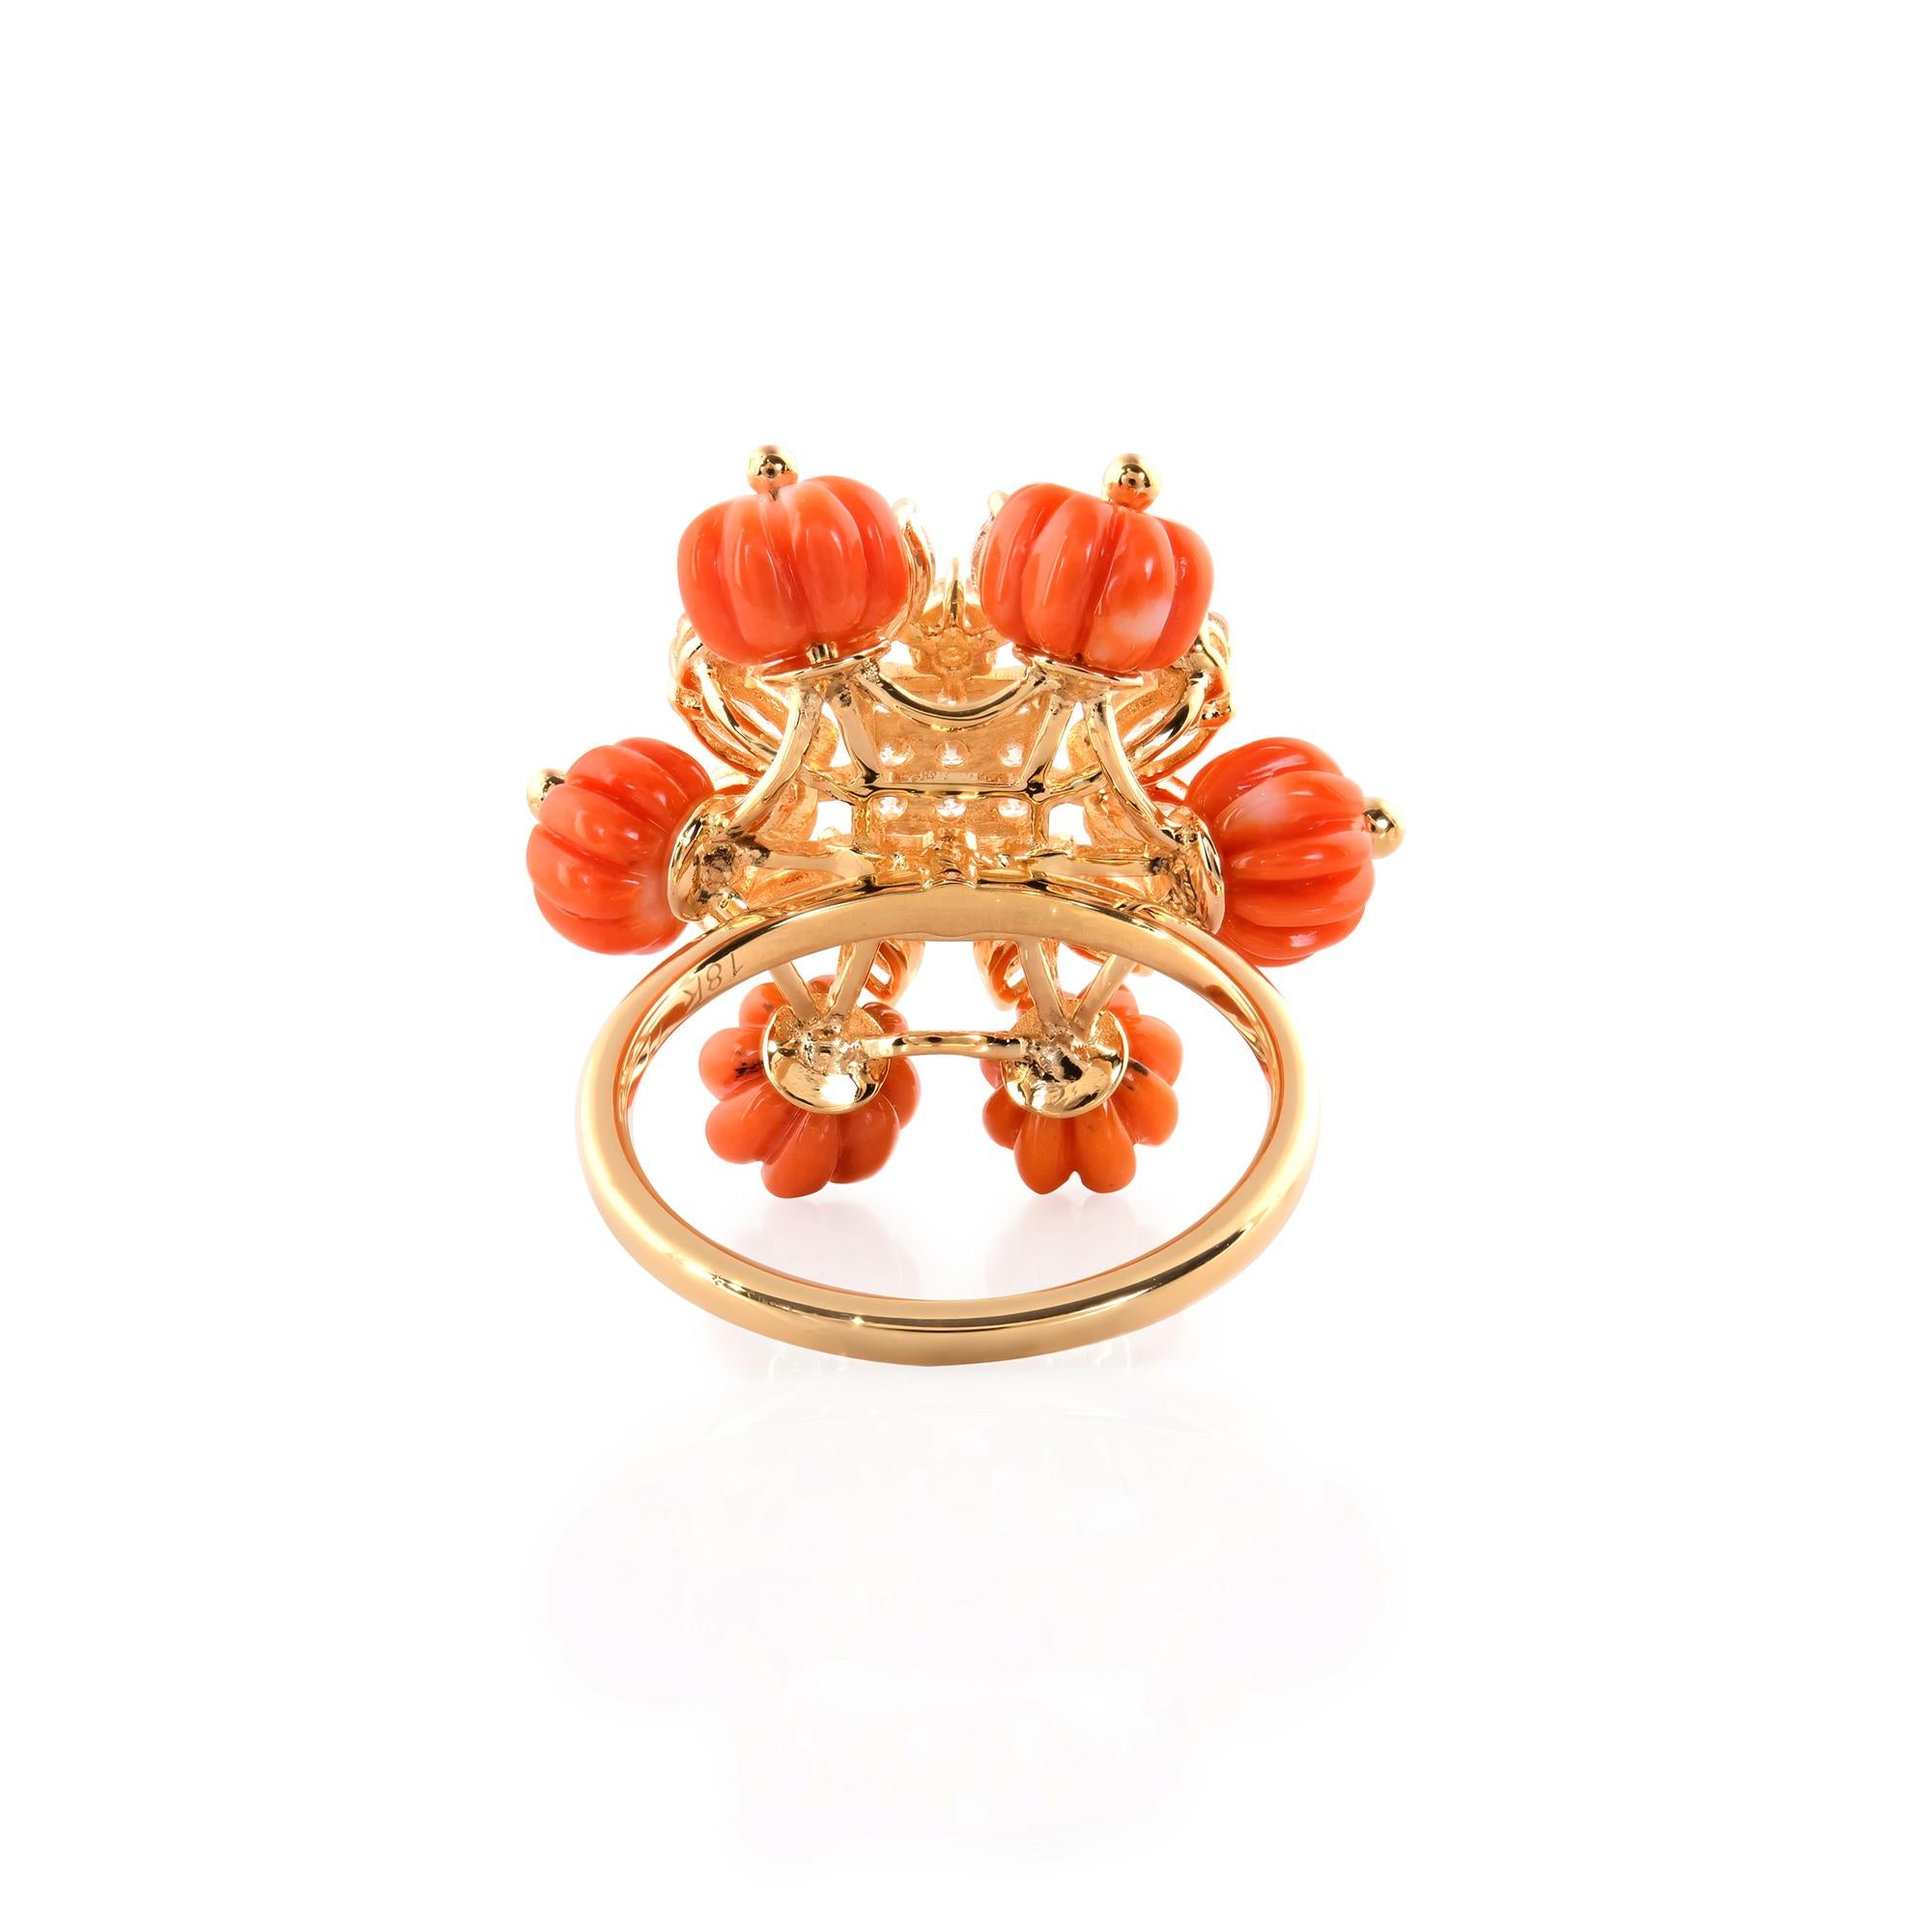 Item Code :- SER-24600
Gross Wt. :- 7.70 gm
18k Solid Yellow Gold Wt. :- 5.85 gm
Natural Diamond Wt. :- 1.56 Ct. ( AVERAGE DIAMOND CLARITY SI1-SI2 & COLOR H-I )
Coral Beads Wt. :- 7.70 Ct.
Ring Size :- 7 US & All size available

✦